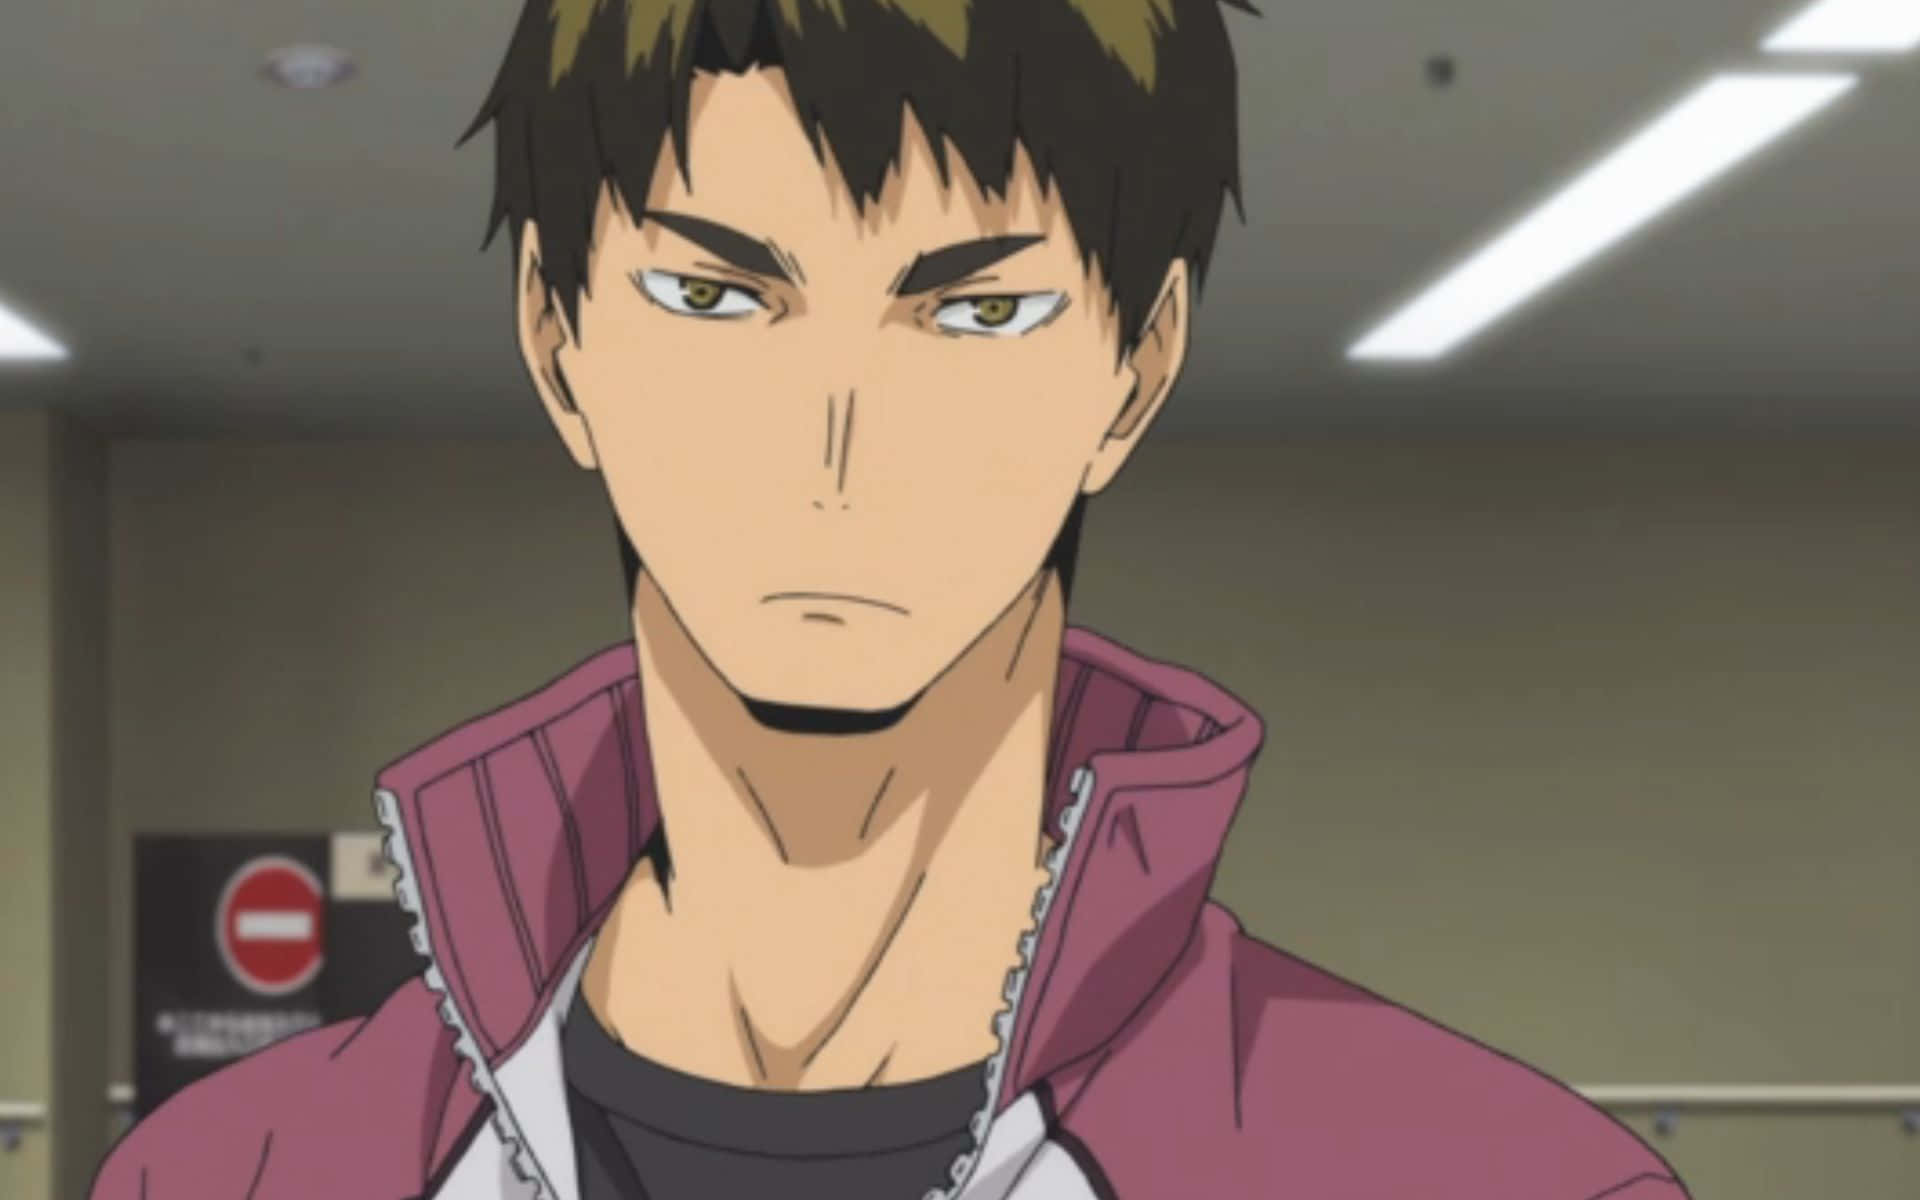 Ushijima Wakatoshi in action during a volleyball match Wallpaper